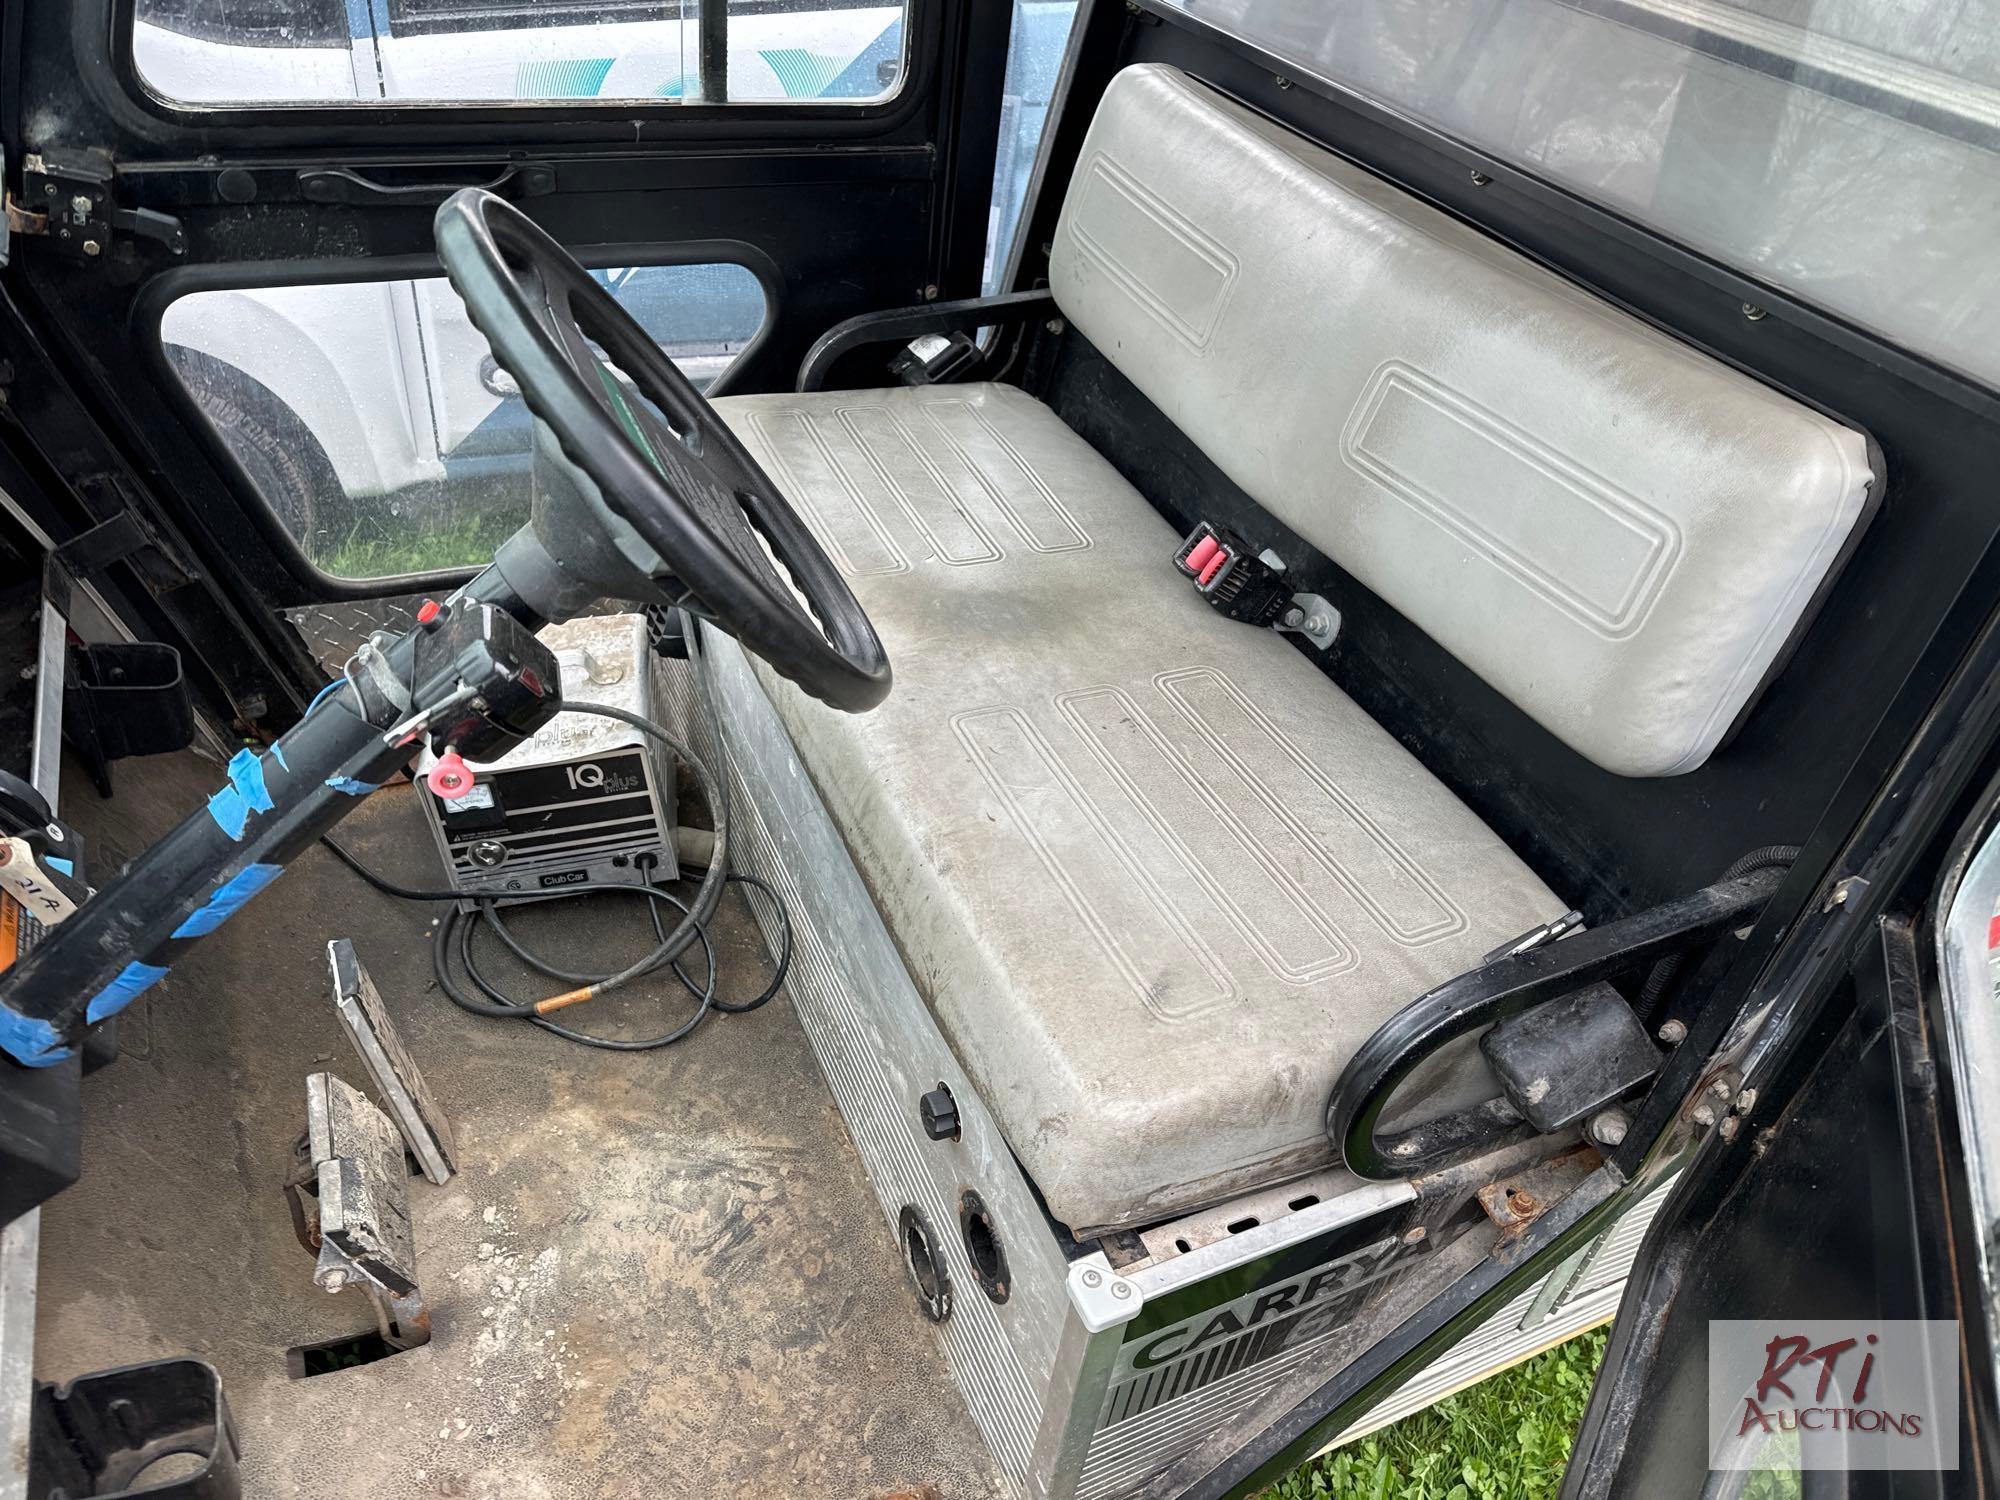 Club Car extended electric golf cart with enclosed body, enclosed cab, charger, brand new batteries